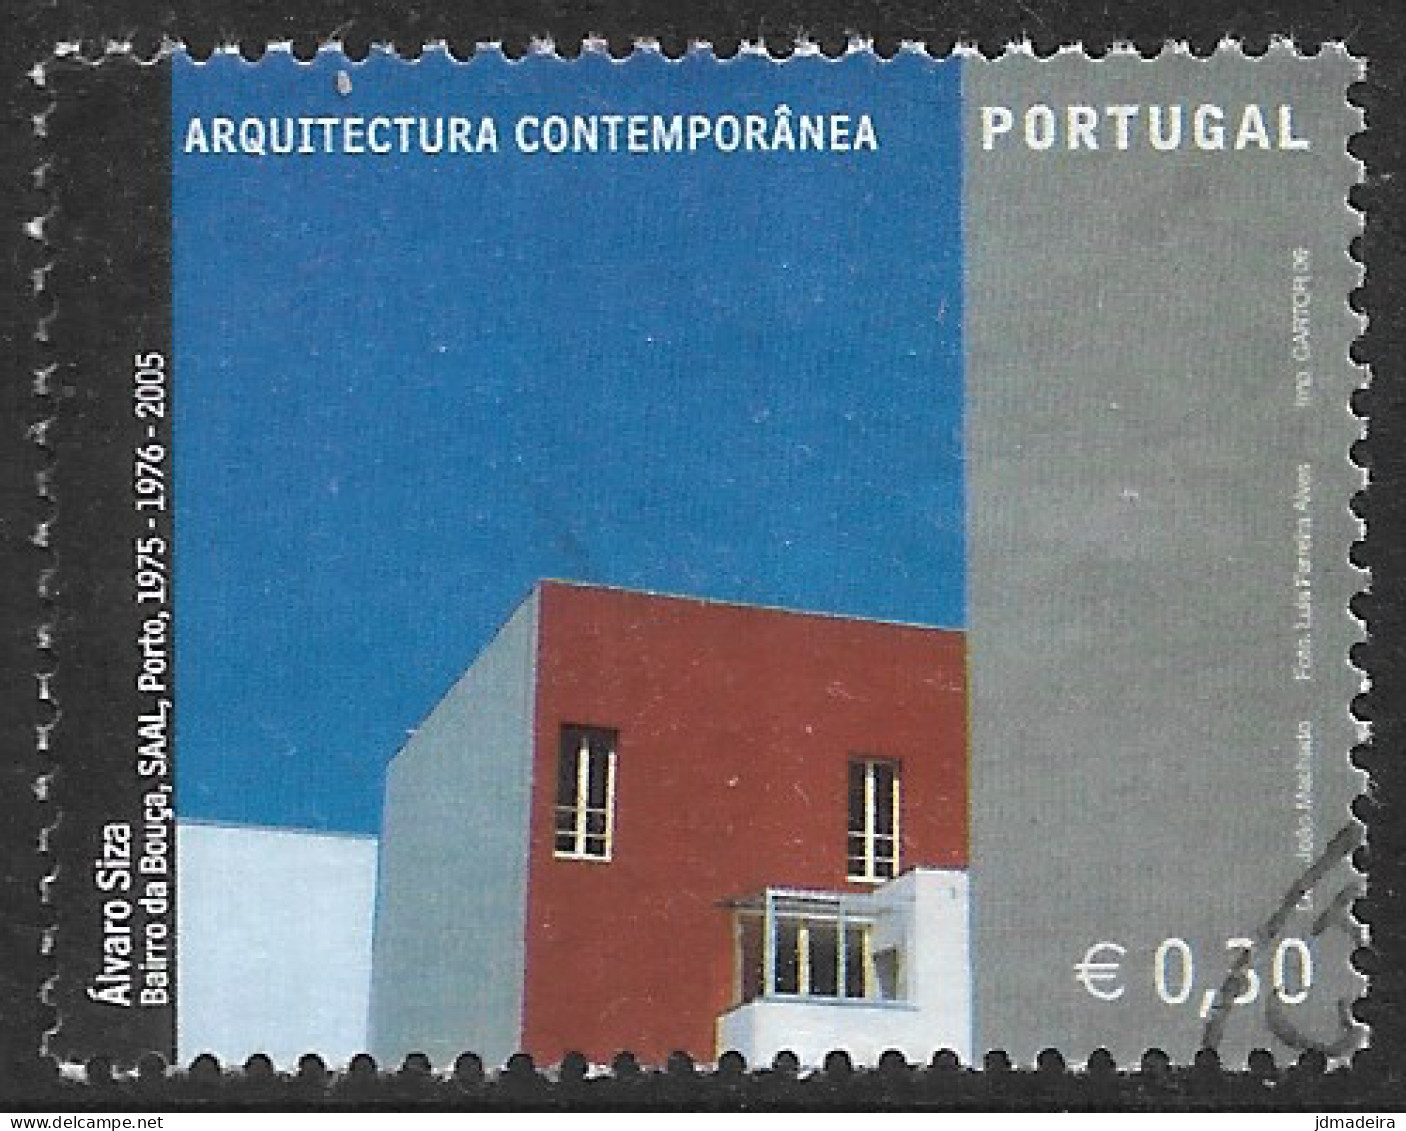 Portugal – 2006 Architecture 0,30 Used Stamp - Usado